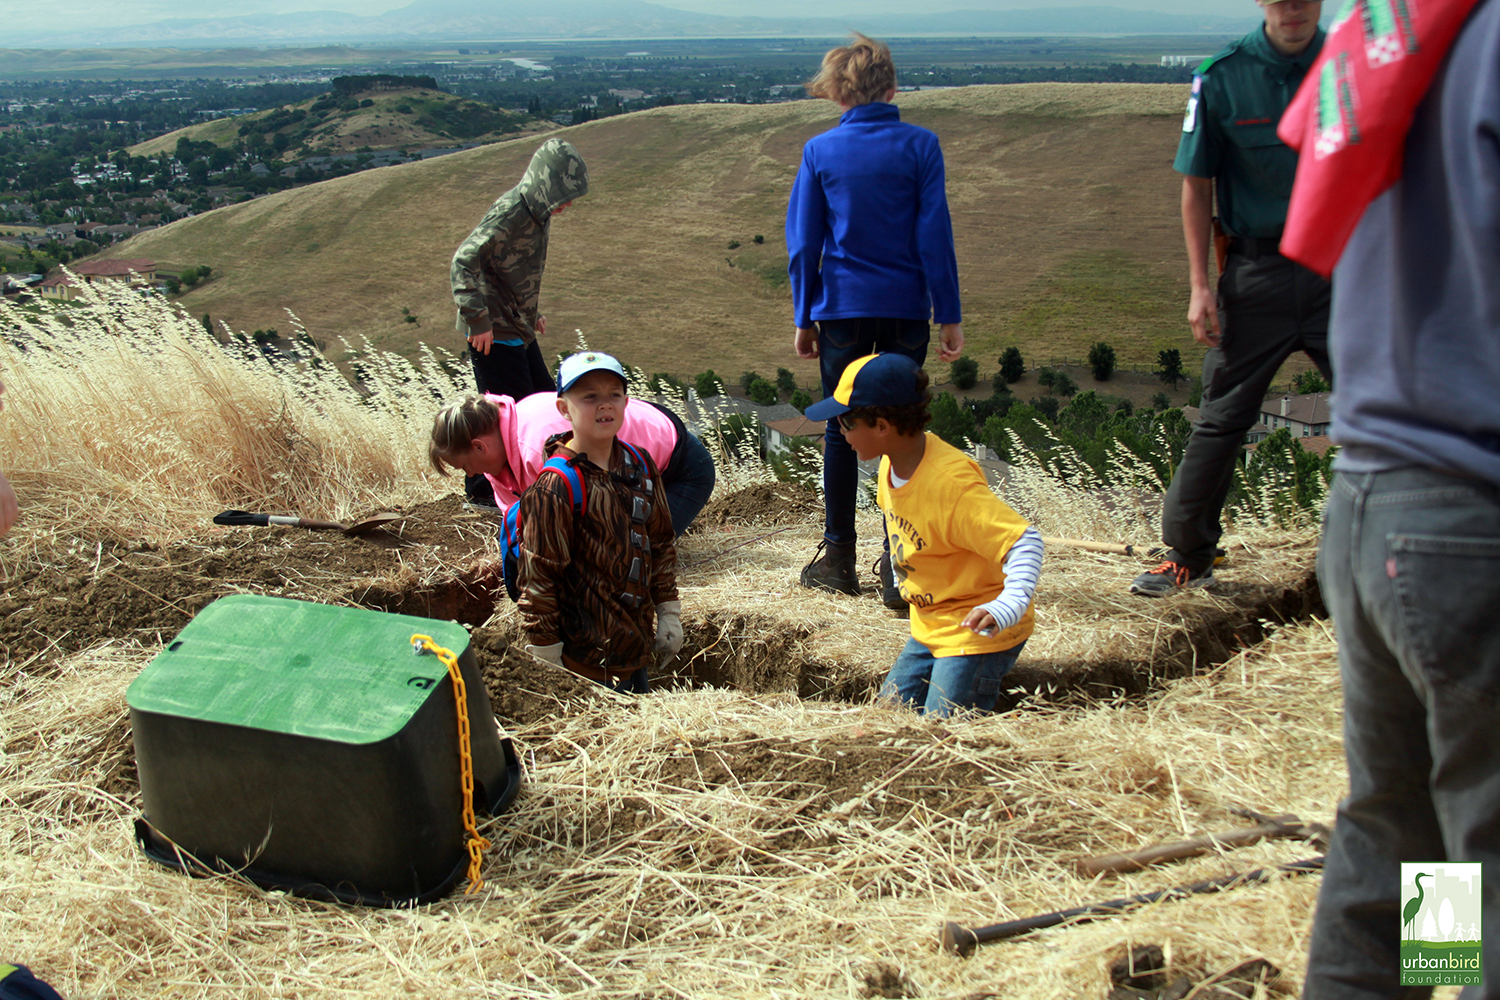 Creating Burrowing Owl Habitat – Cub Scouts join the conservation